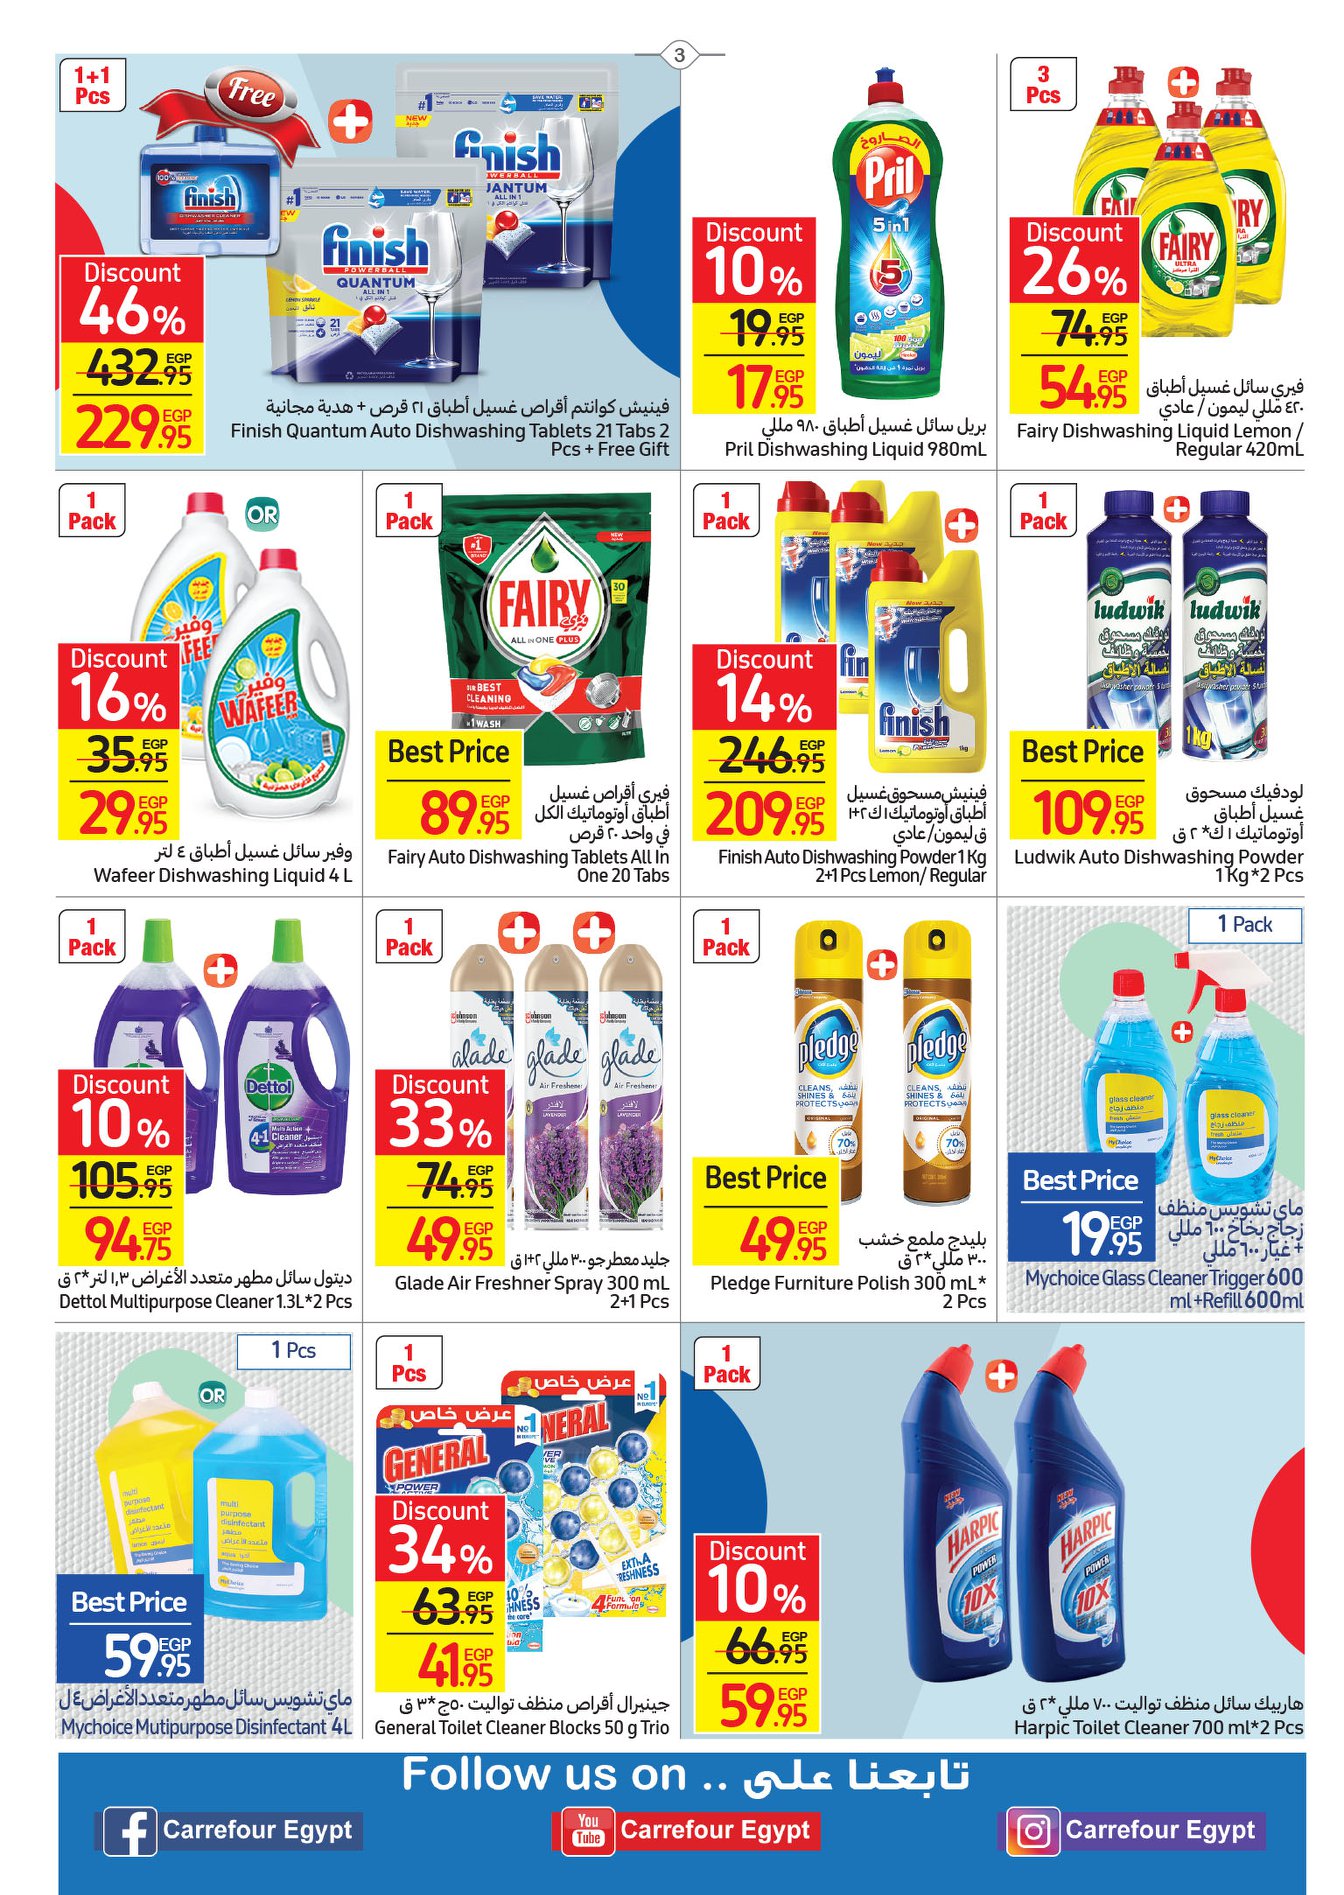 Enjoy now the strongest Carrefour offers from 17 to 25 April 2022.. Huge discounts on home essentials 22